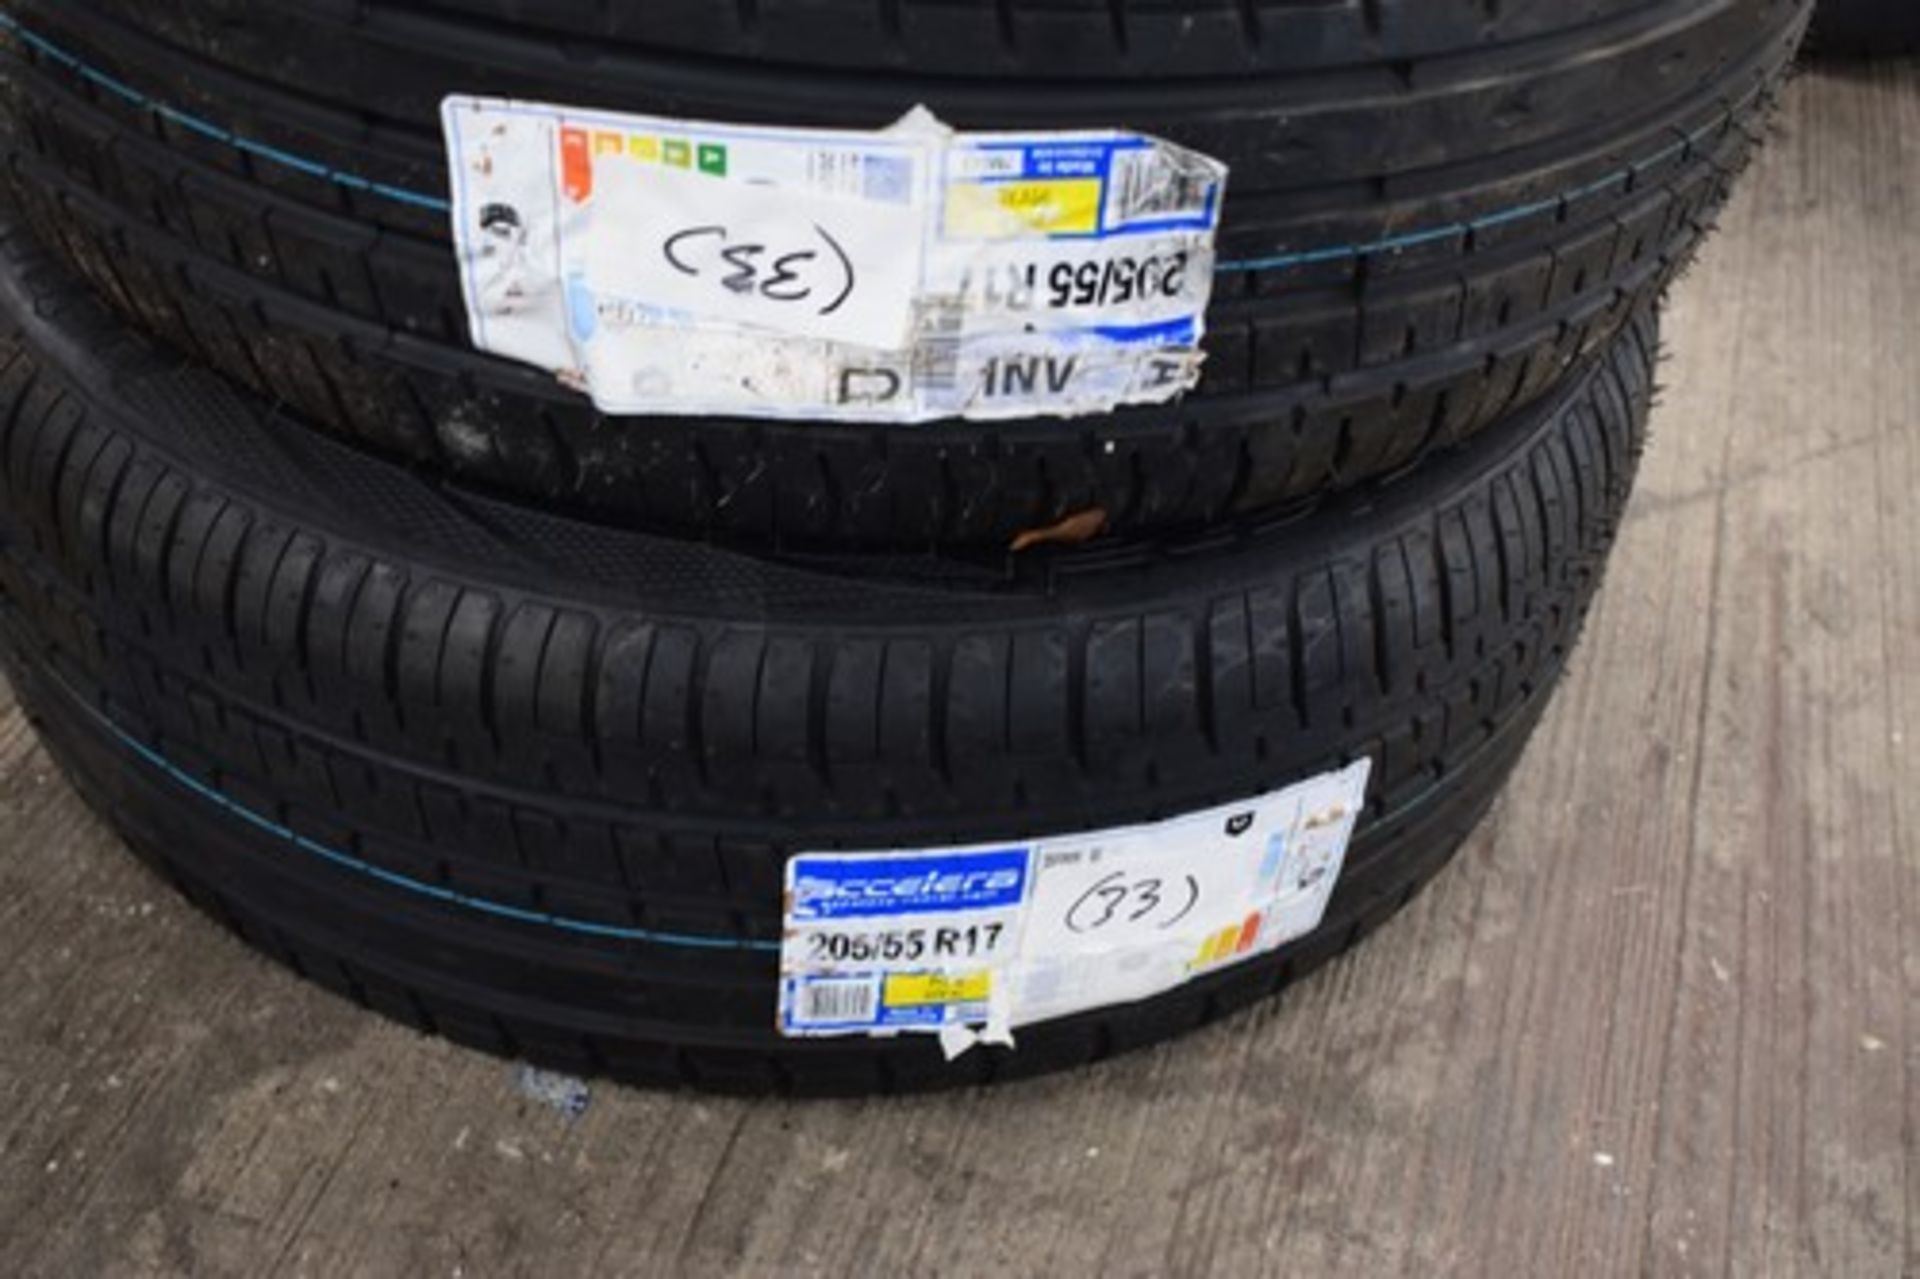 1 x pair of Accelera PHI-R tyres, size 205/55R17 95V XL - new with label (C3)(33)